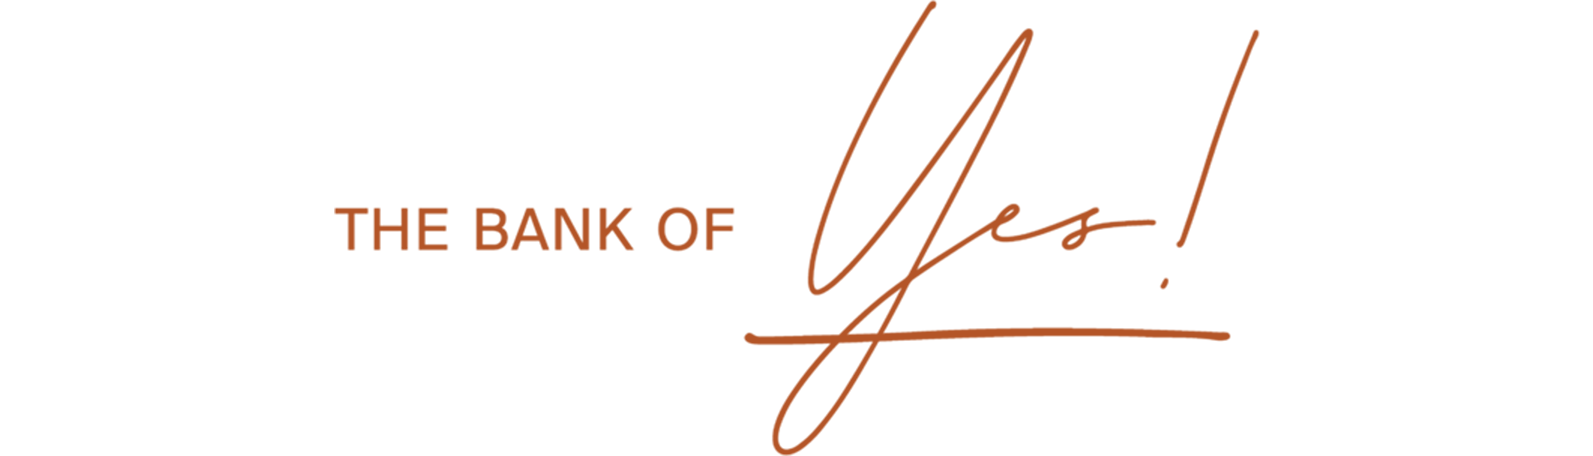 The Bank of YES! slogan in orange